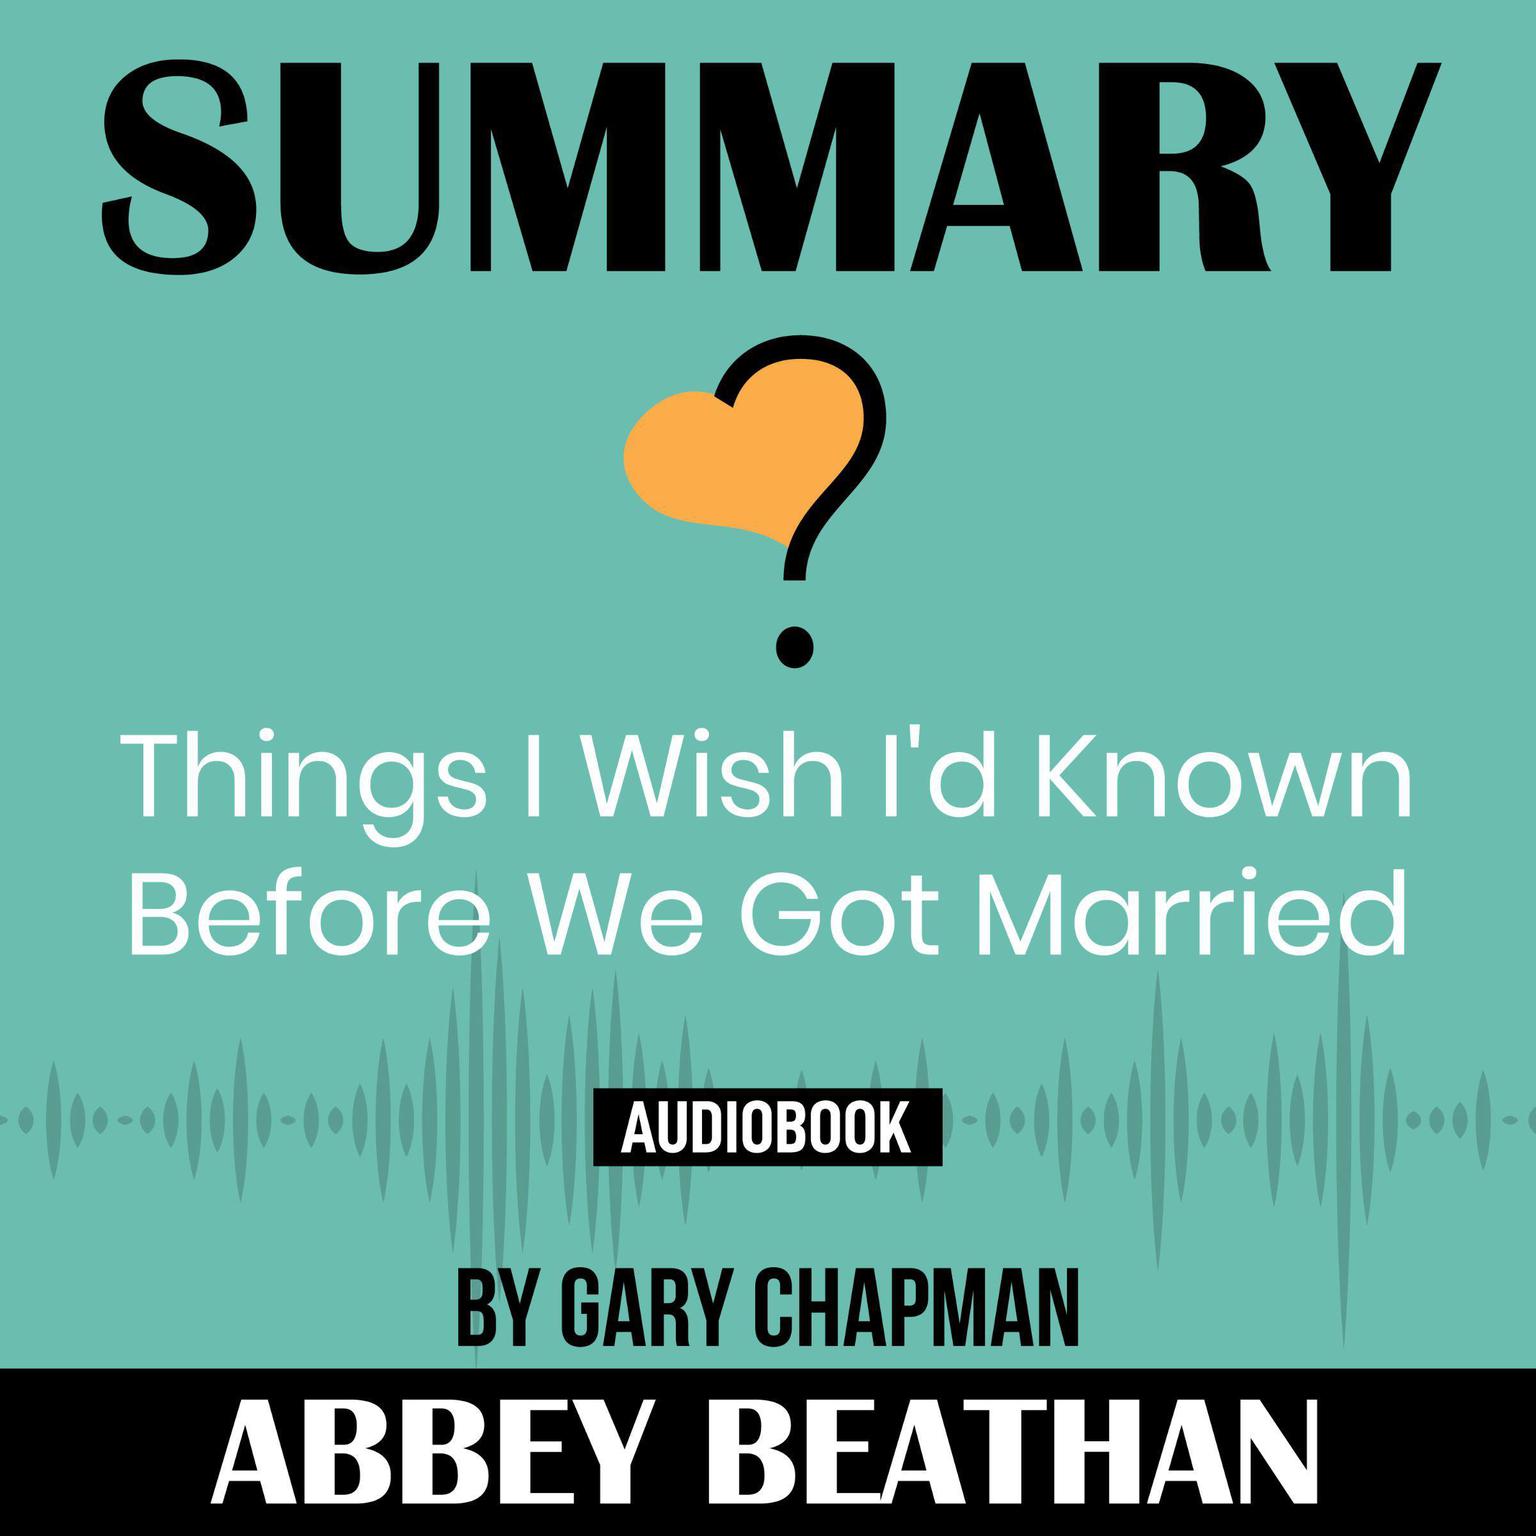 Summary Of Things I Wish I D Known Before We Got Married By Gary Chapman Audiobook By Abbey Beathan